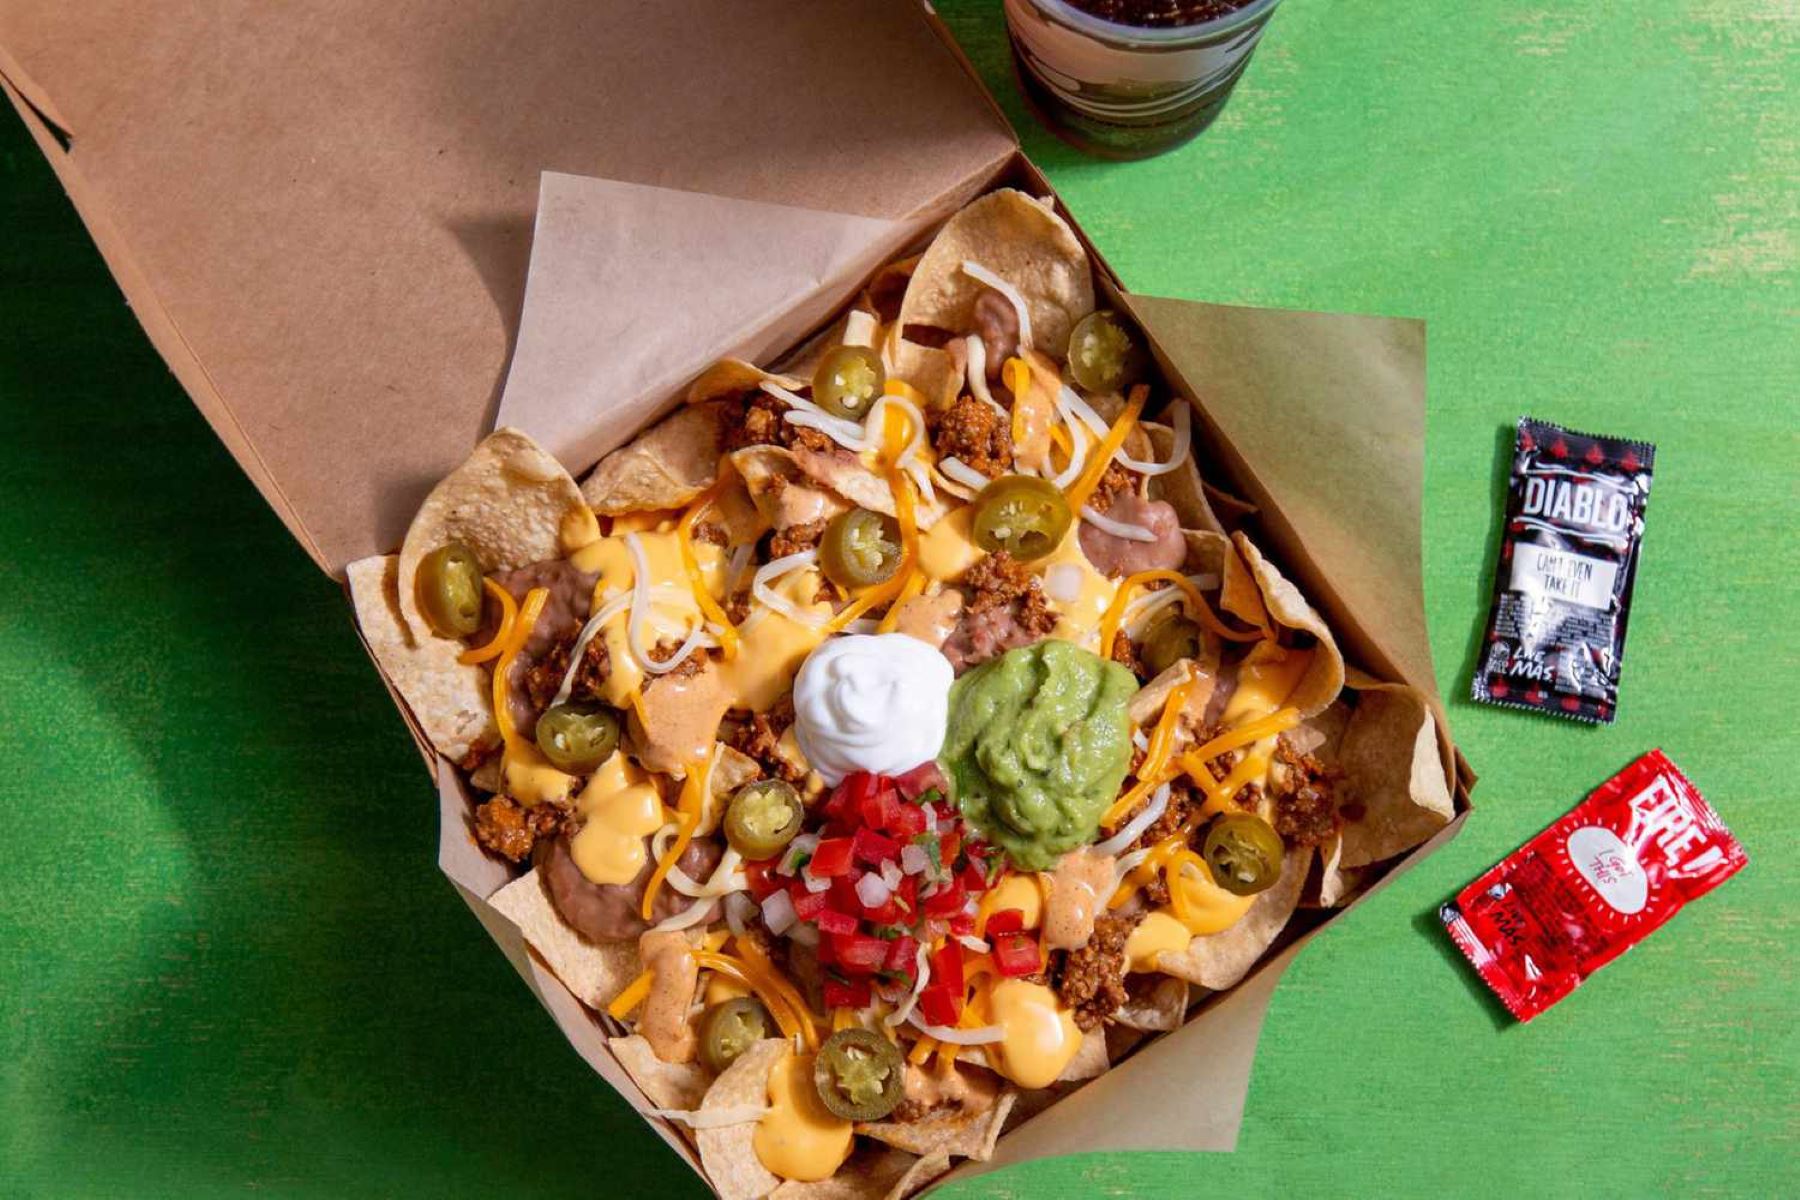 Taco Bell’s Happy Hour: Unleash Your Taste Buds With These Amazing Deals!